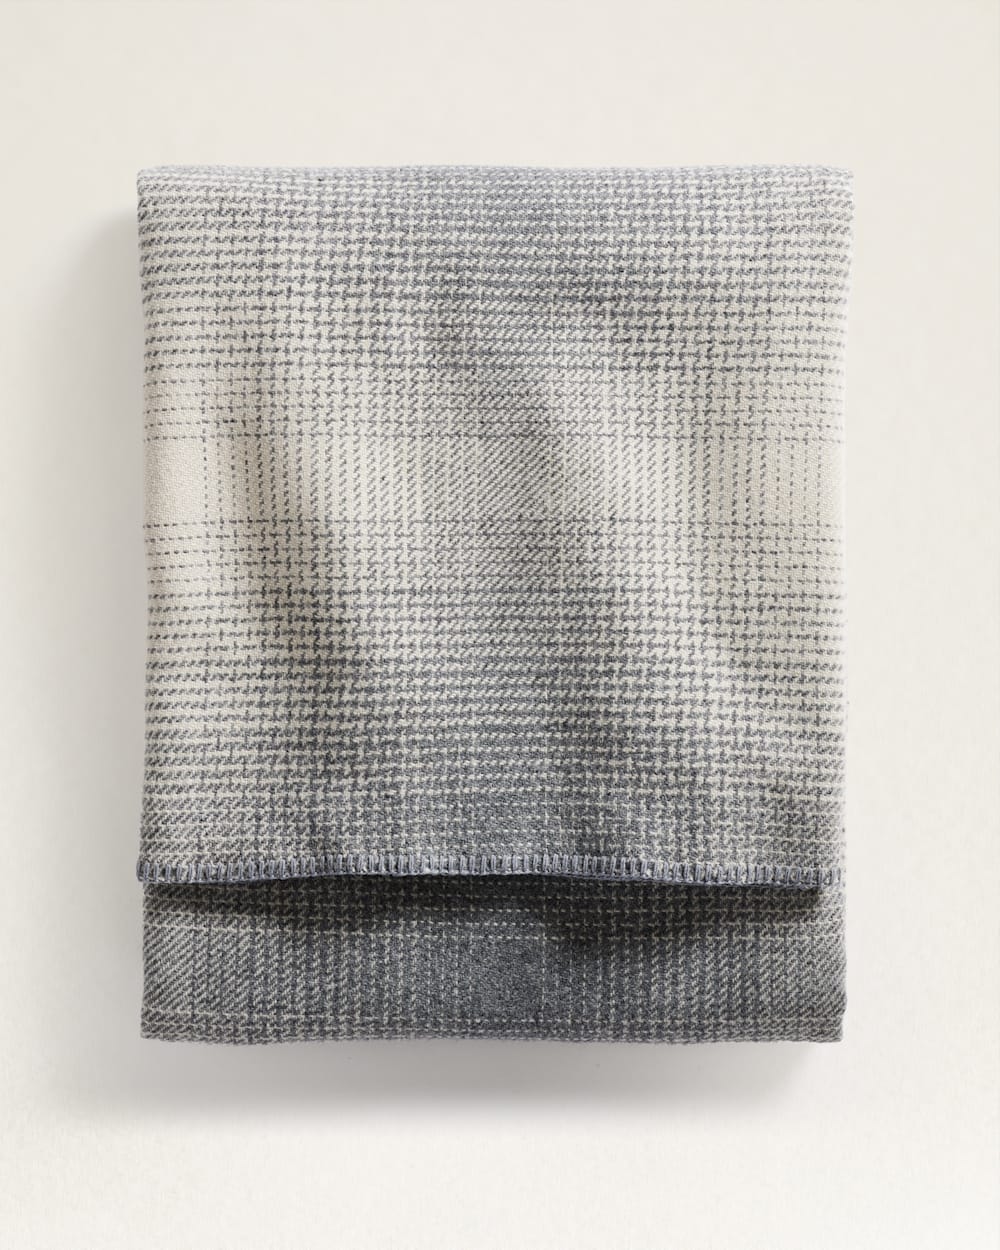 ALTERNATE VIEW OF ECO-WISE WOOL OMBRE BLANKET IN BONE/GREY image number 4